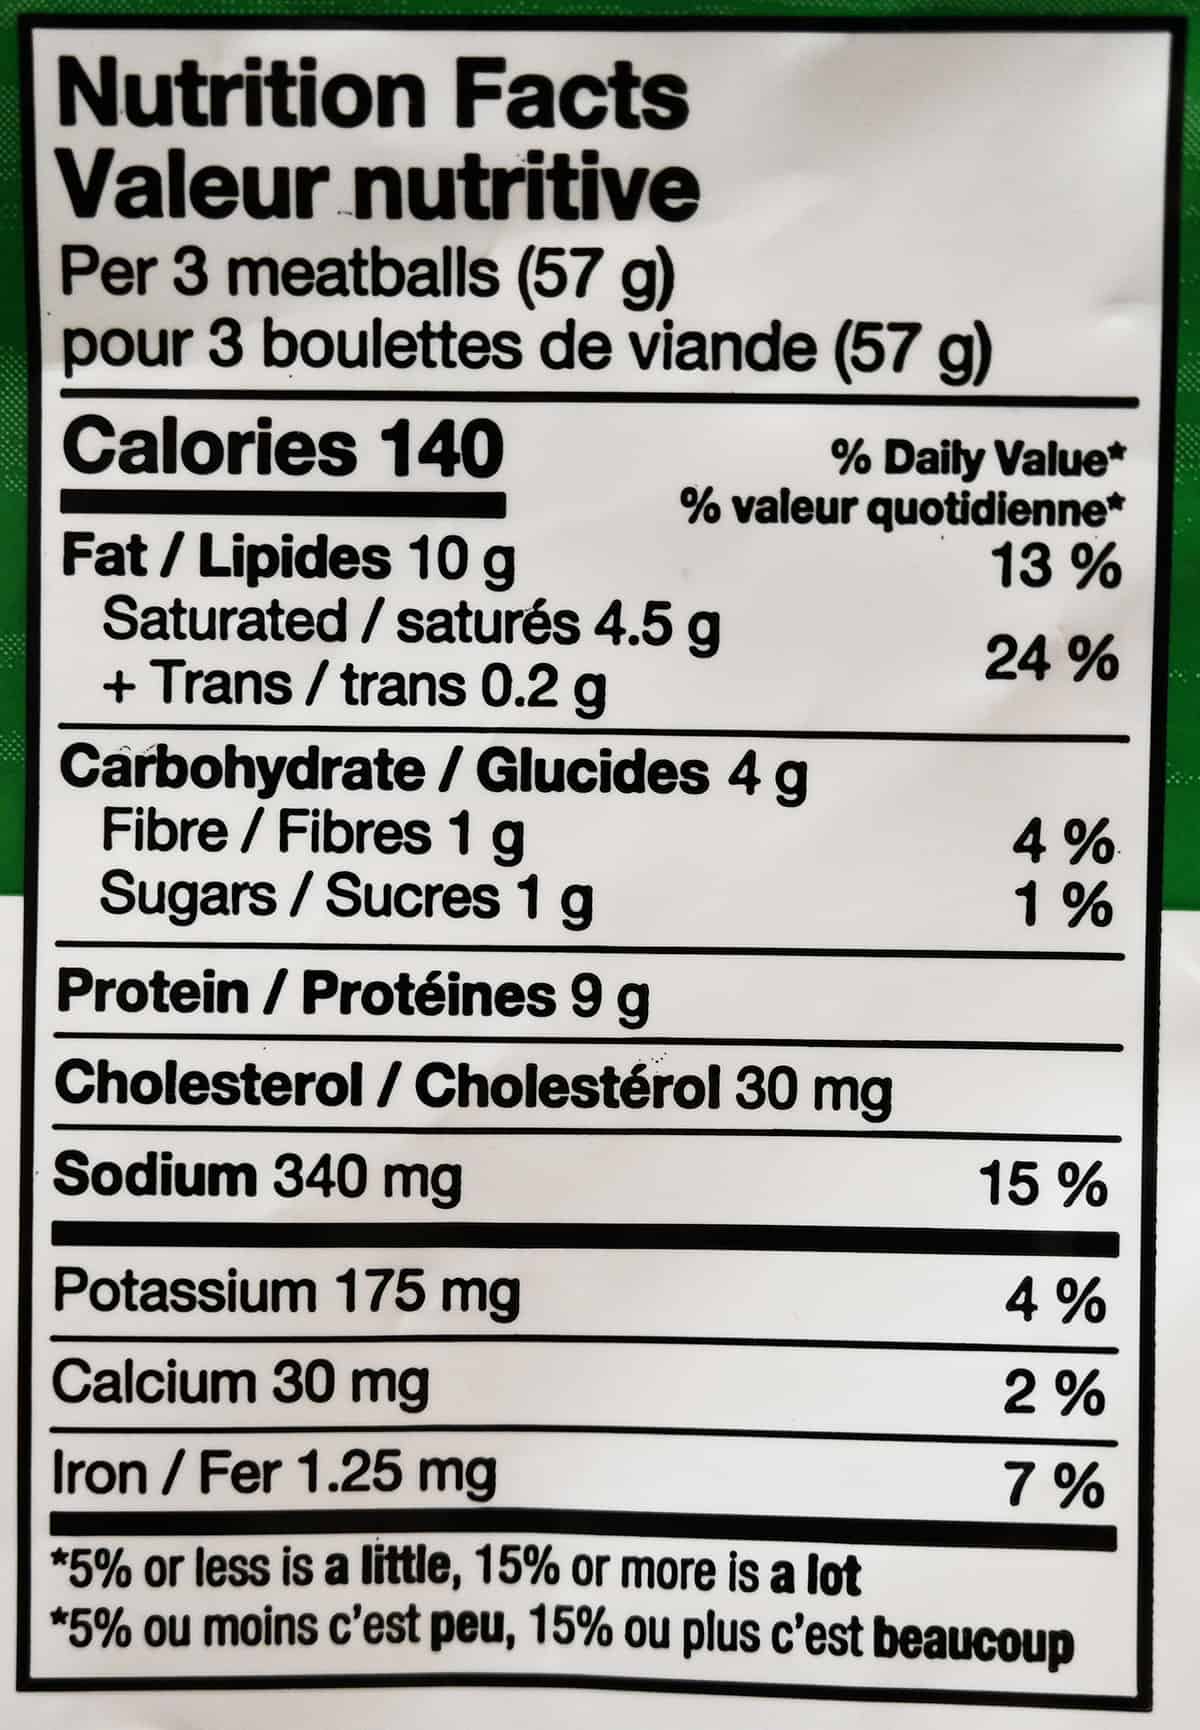 Image of the nutrition facts for the meatballs from the bag.